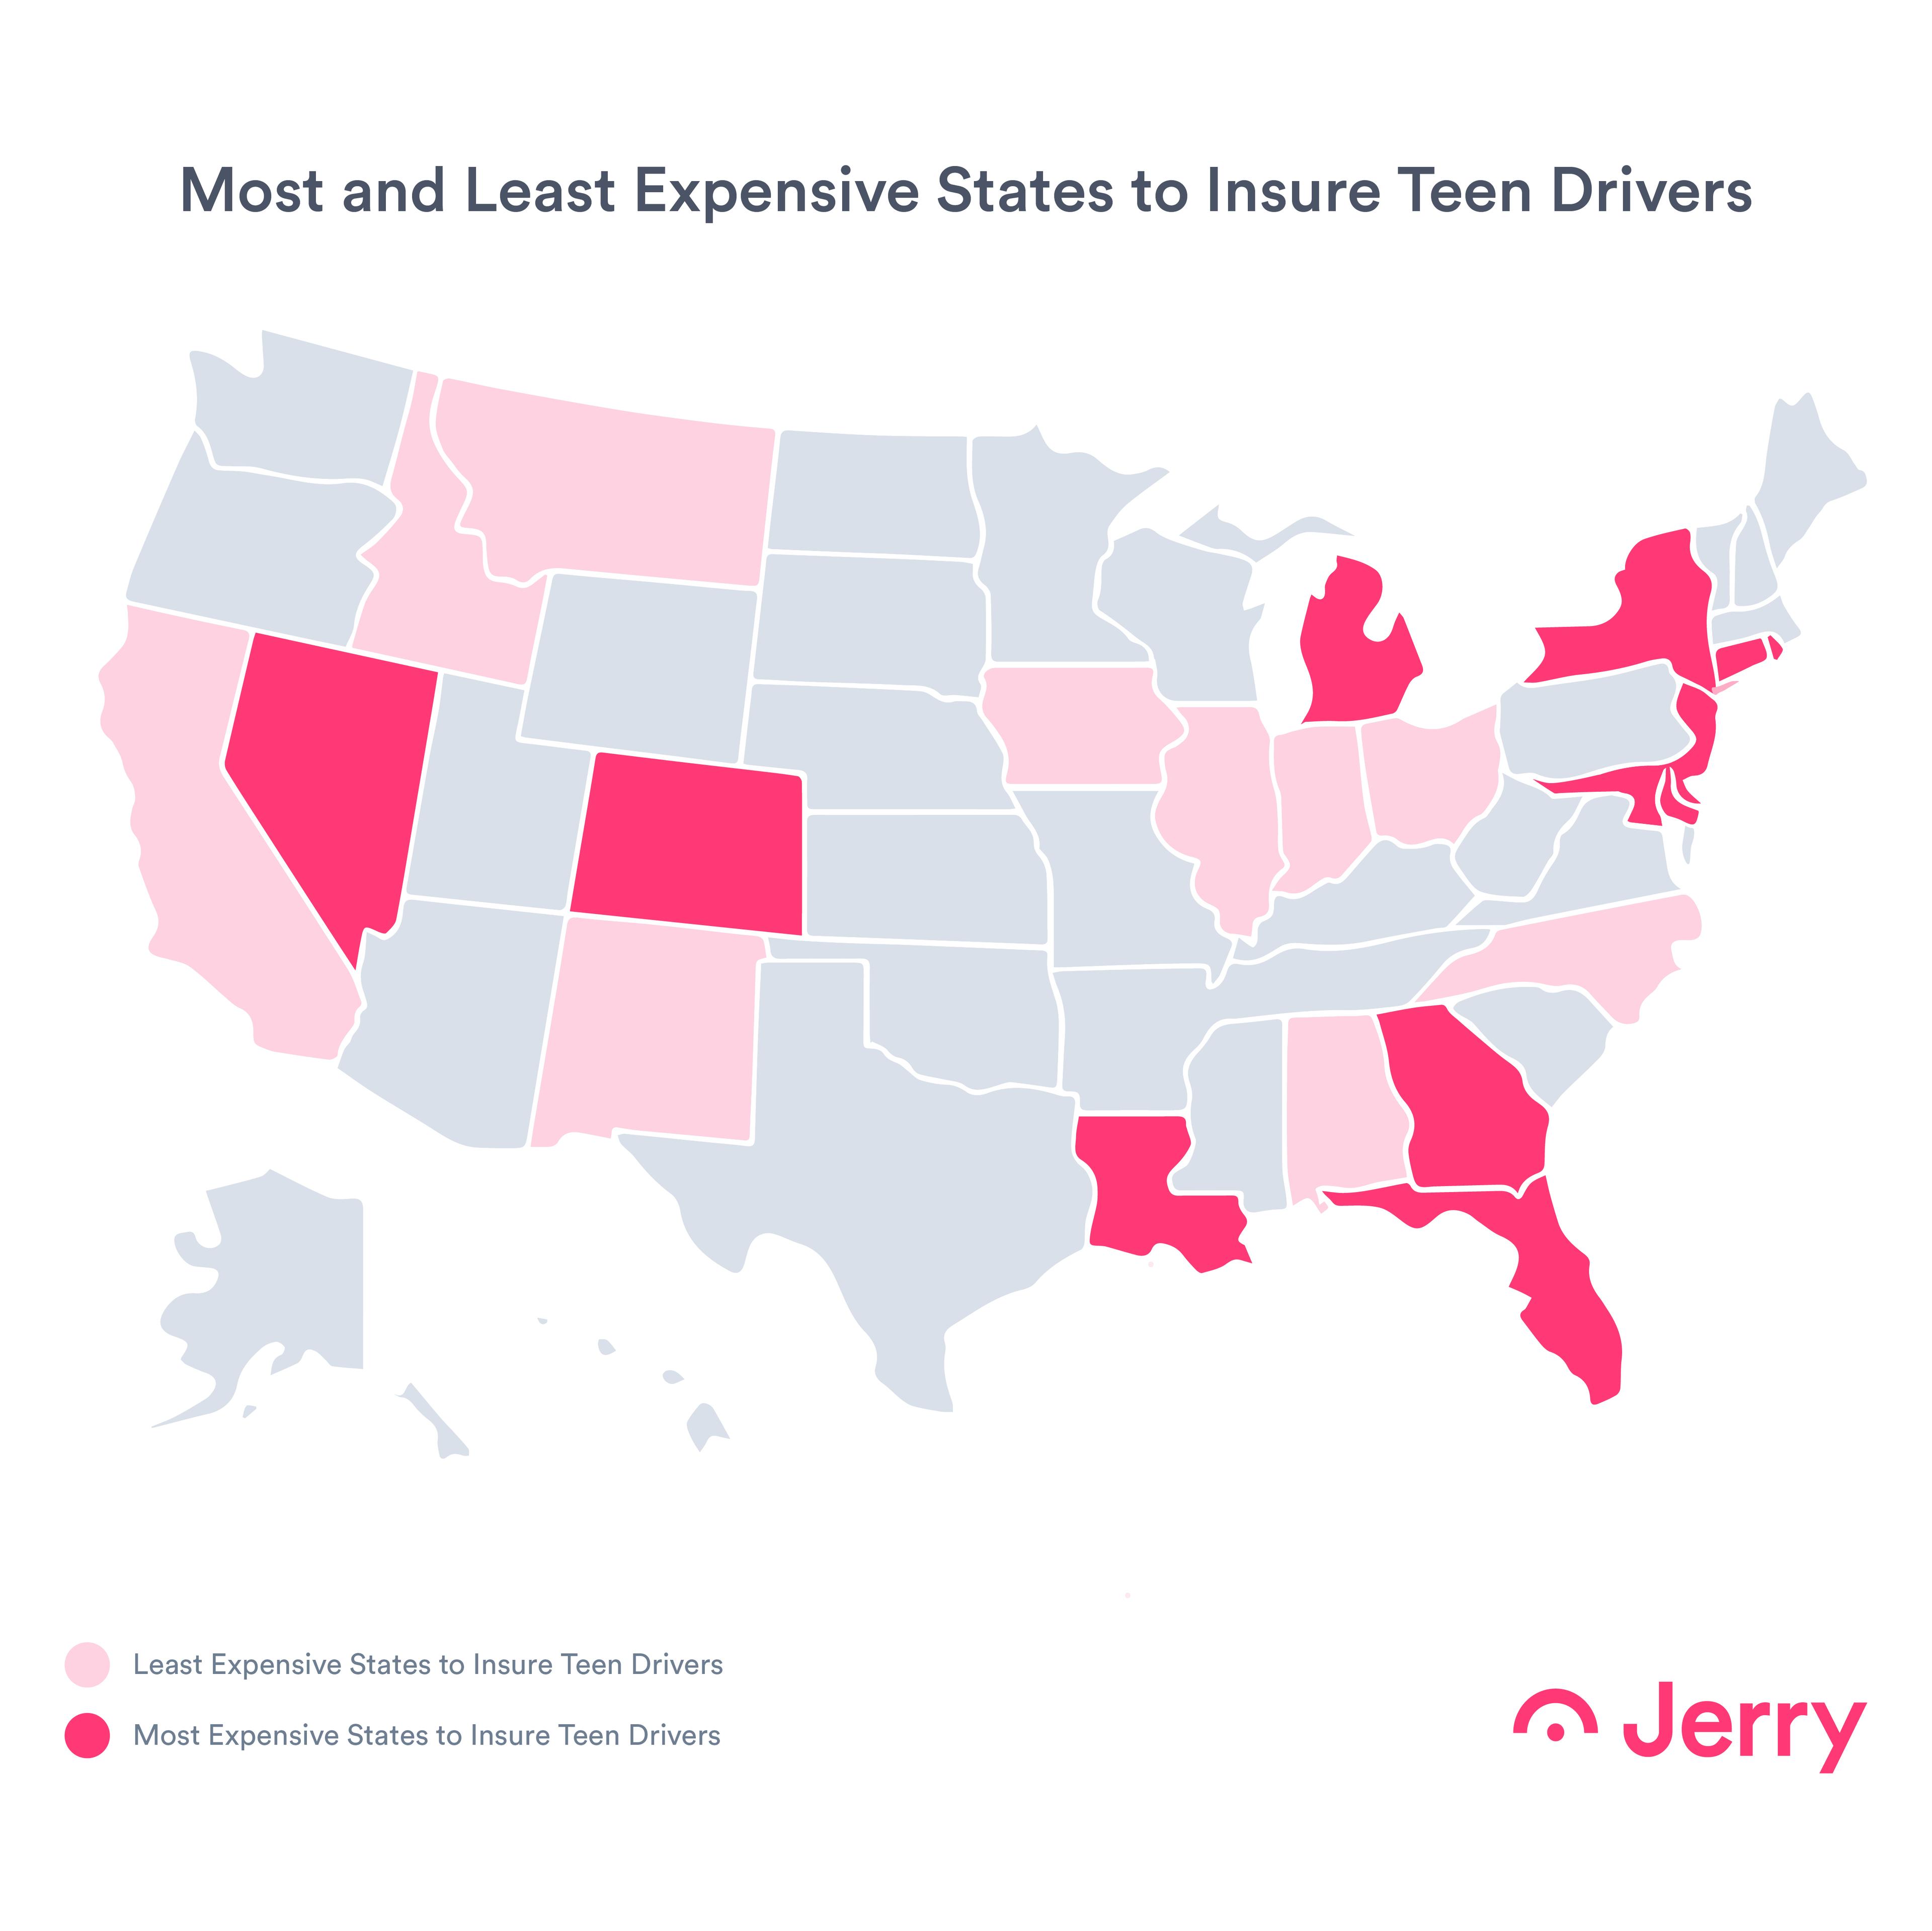 A map highlighting the most and least expensive states for teen driver car insurance